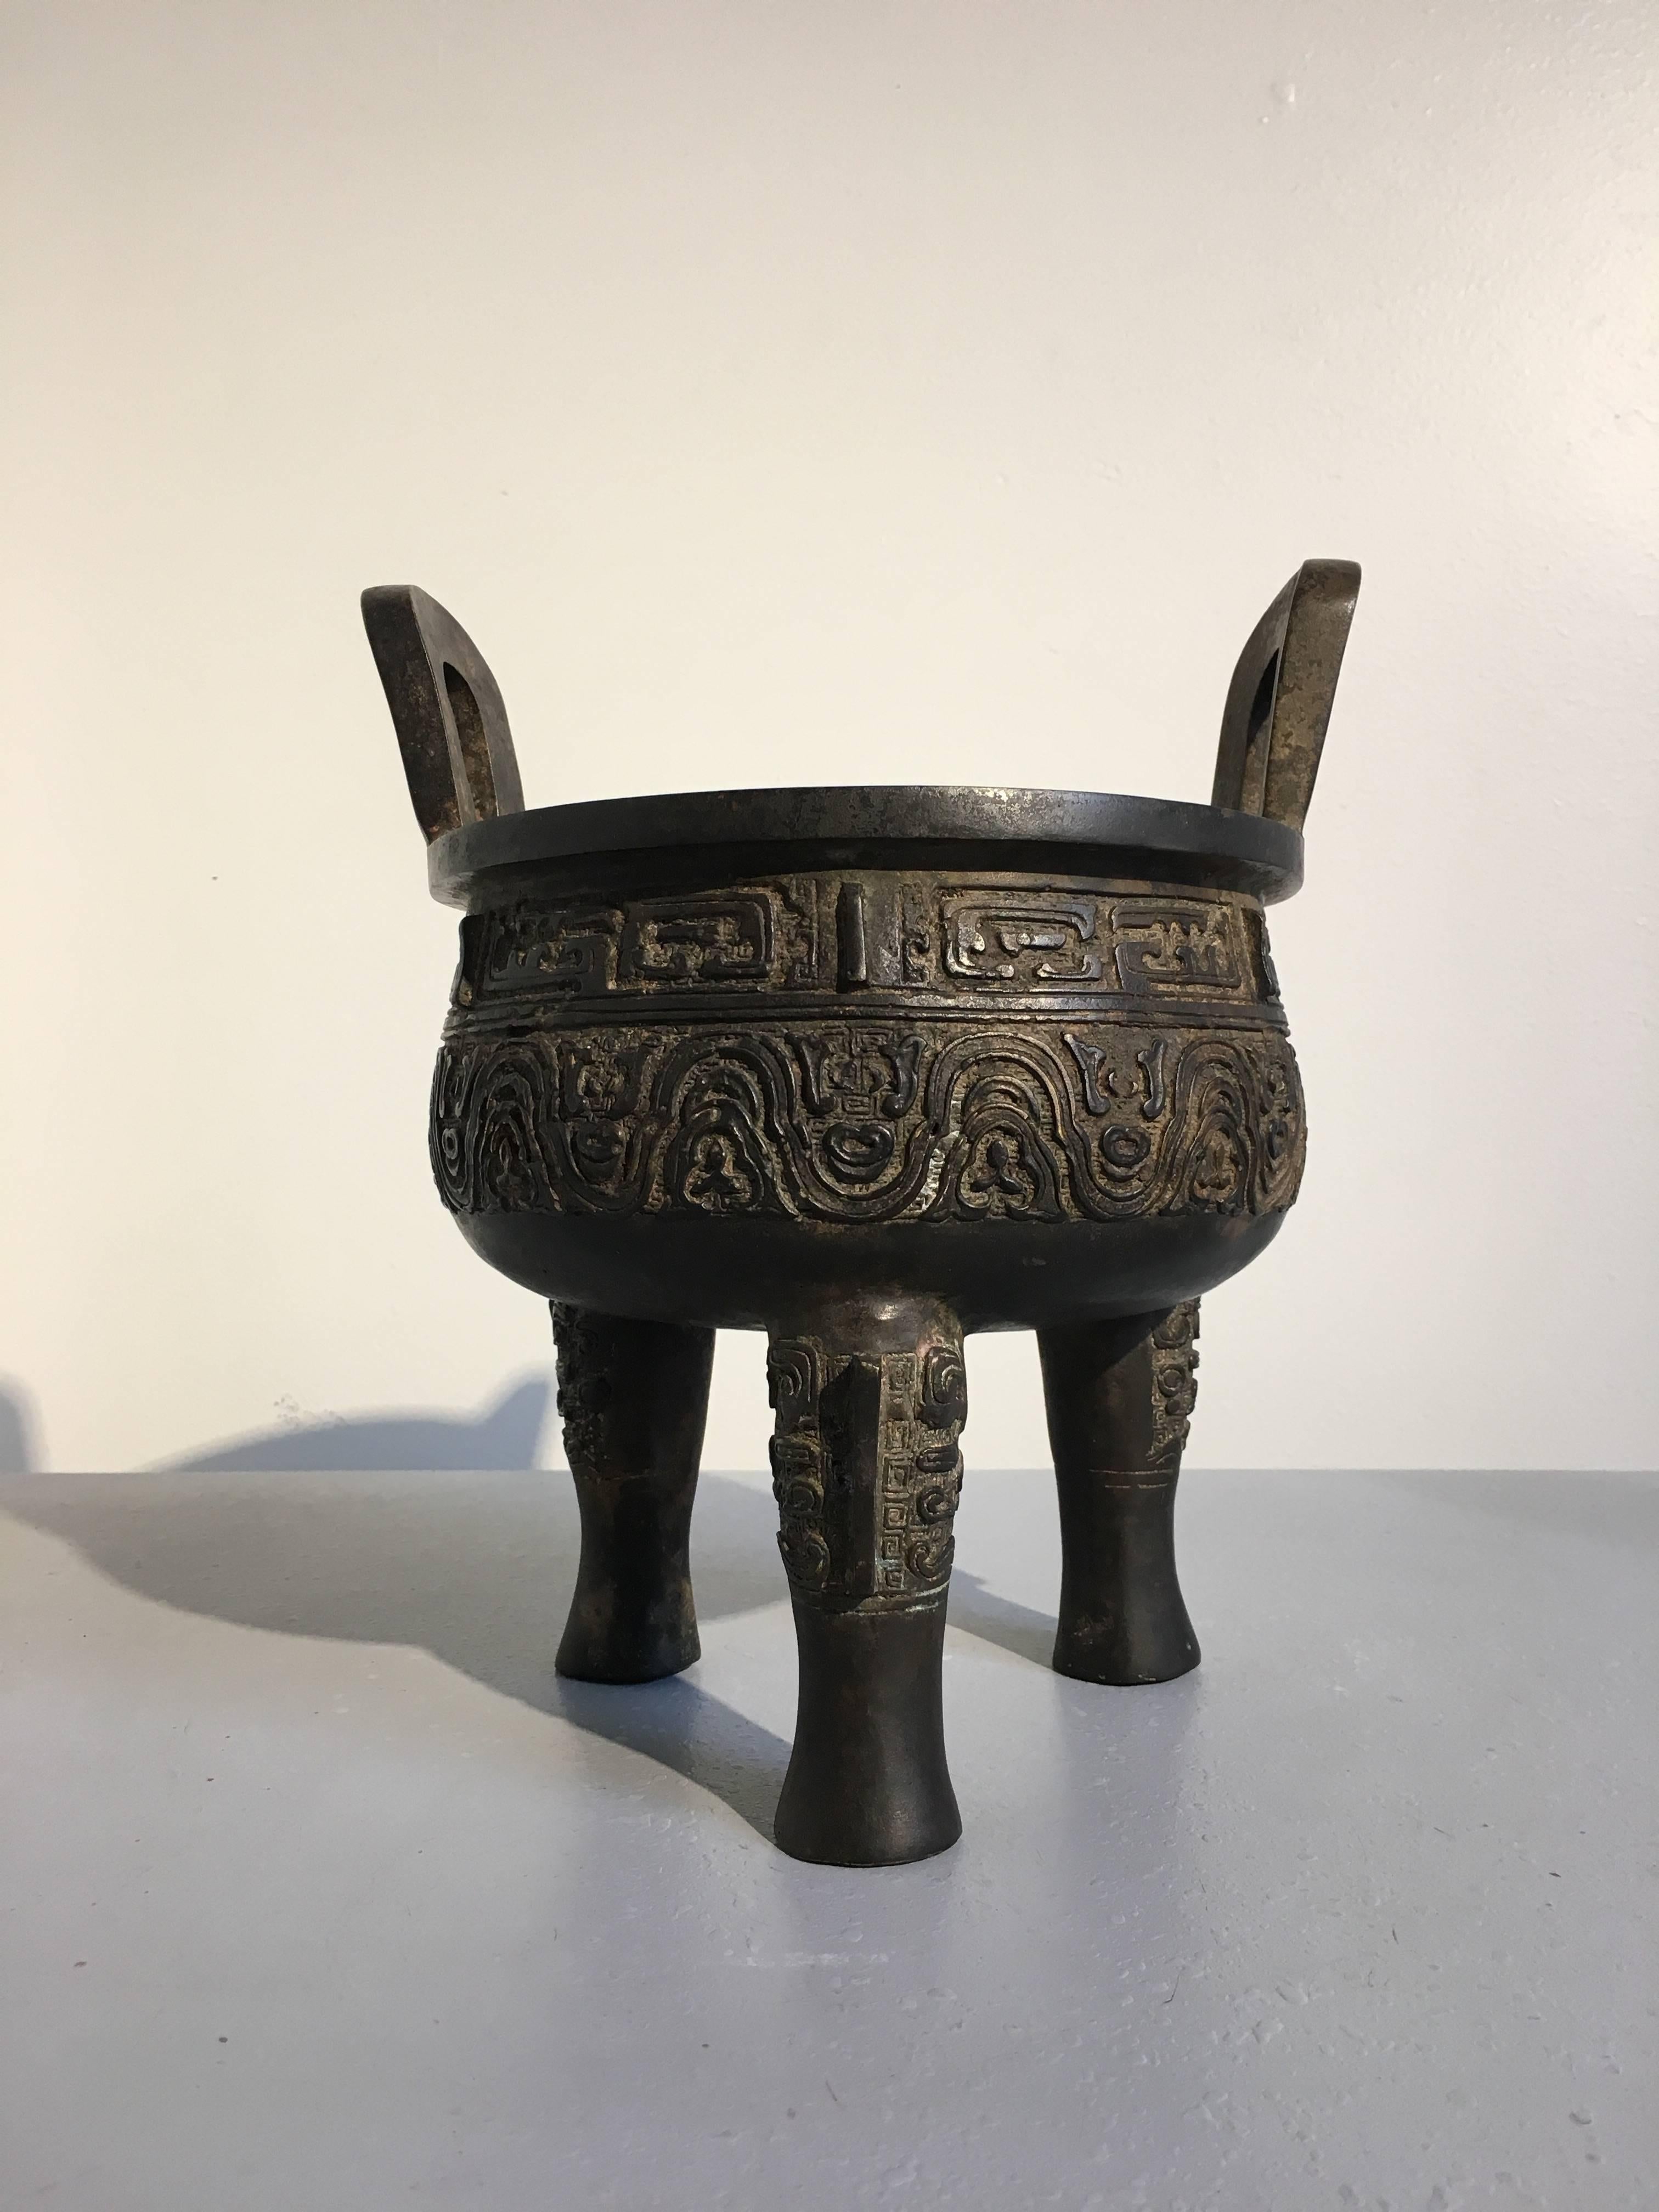 A well cast Chinese archaistic bronze tripod censer, ding, in the Ming style, Republic Period, early 20th century, China.

Heavily cast in the archaistic style, seemingly inspired by Ming Dynasty archaistic bronzes, the ding sits on long tripod legs